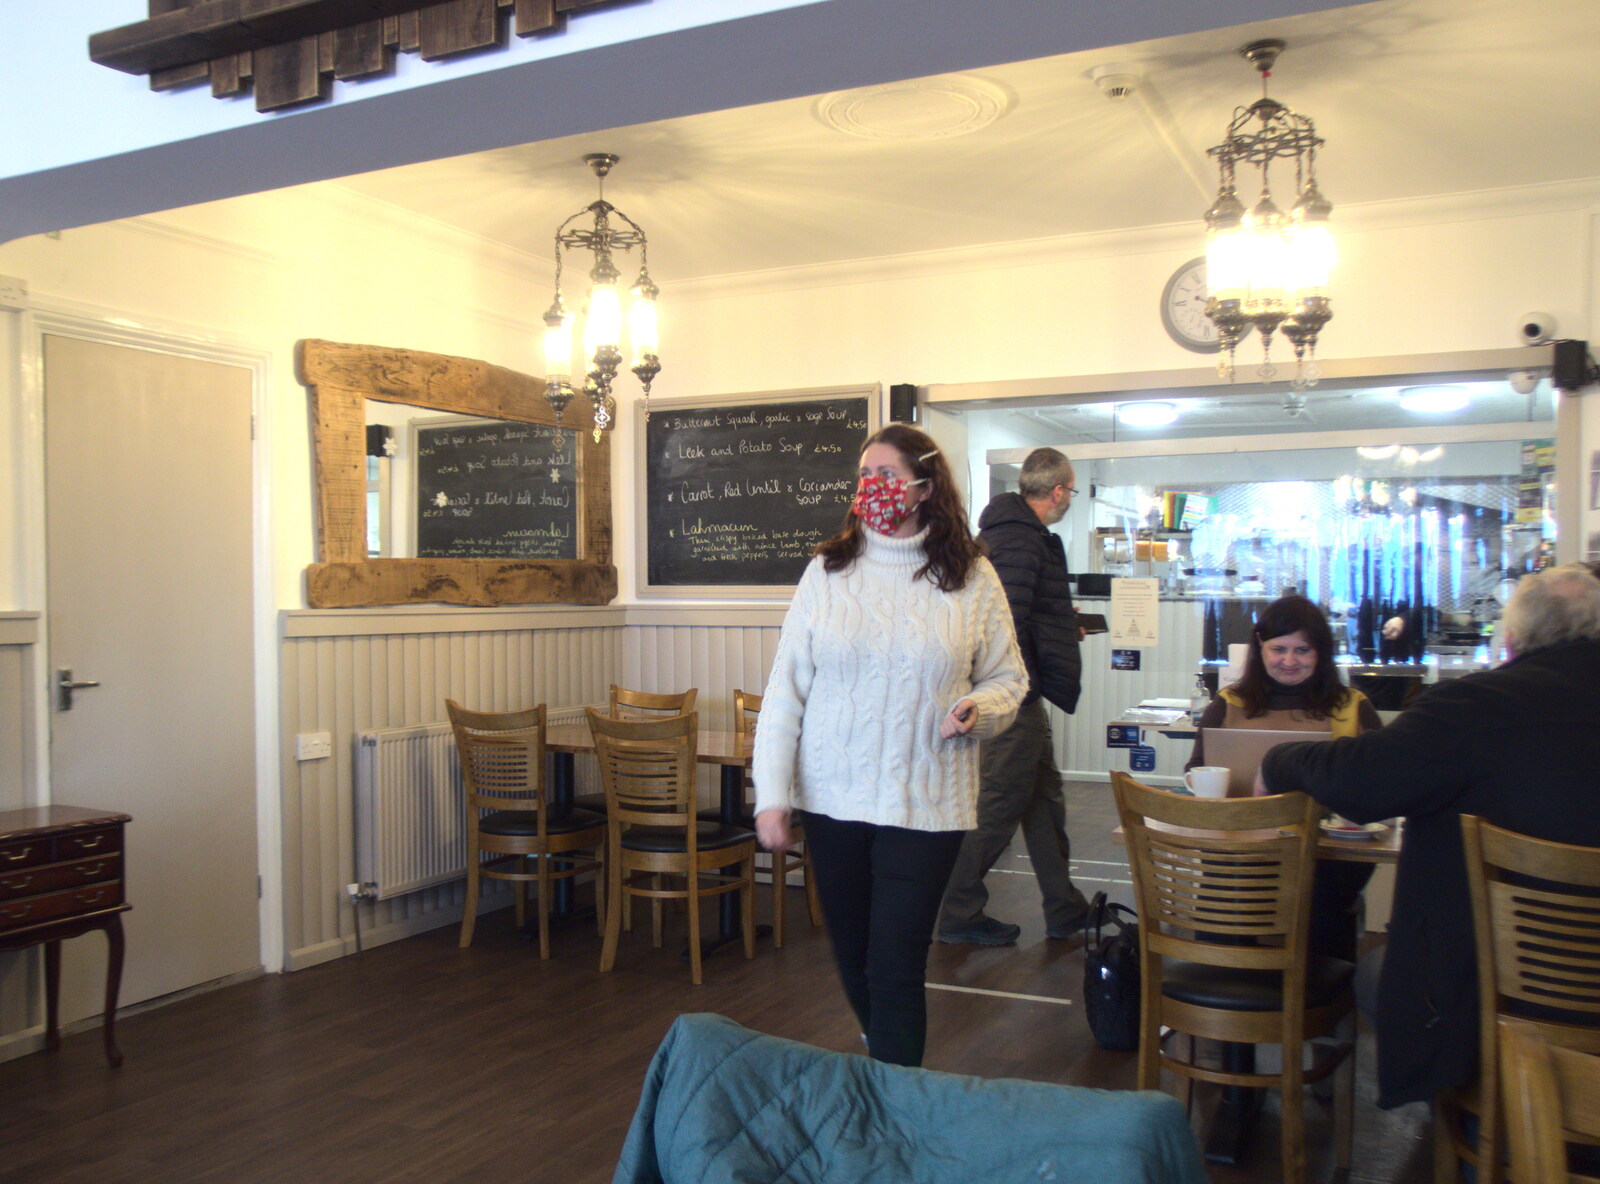 Isobel roams around Caféye after paying up from A Virtual New Year's Eve, Brome, Suffolk - 31st December 2020